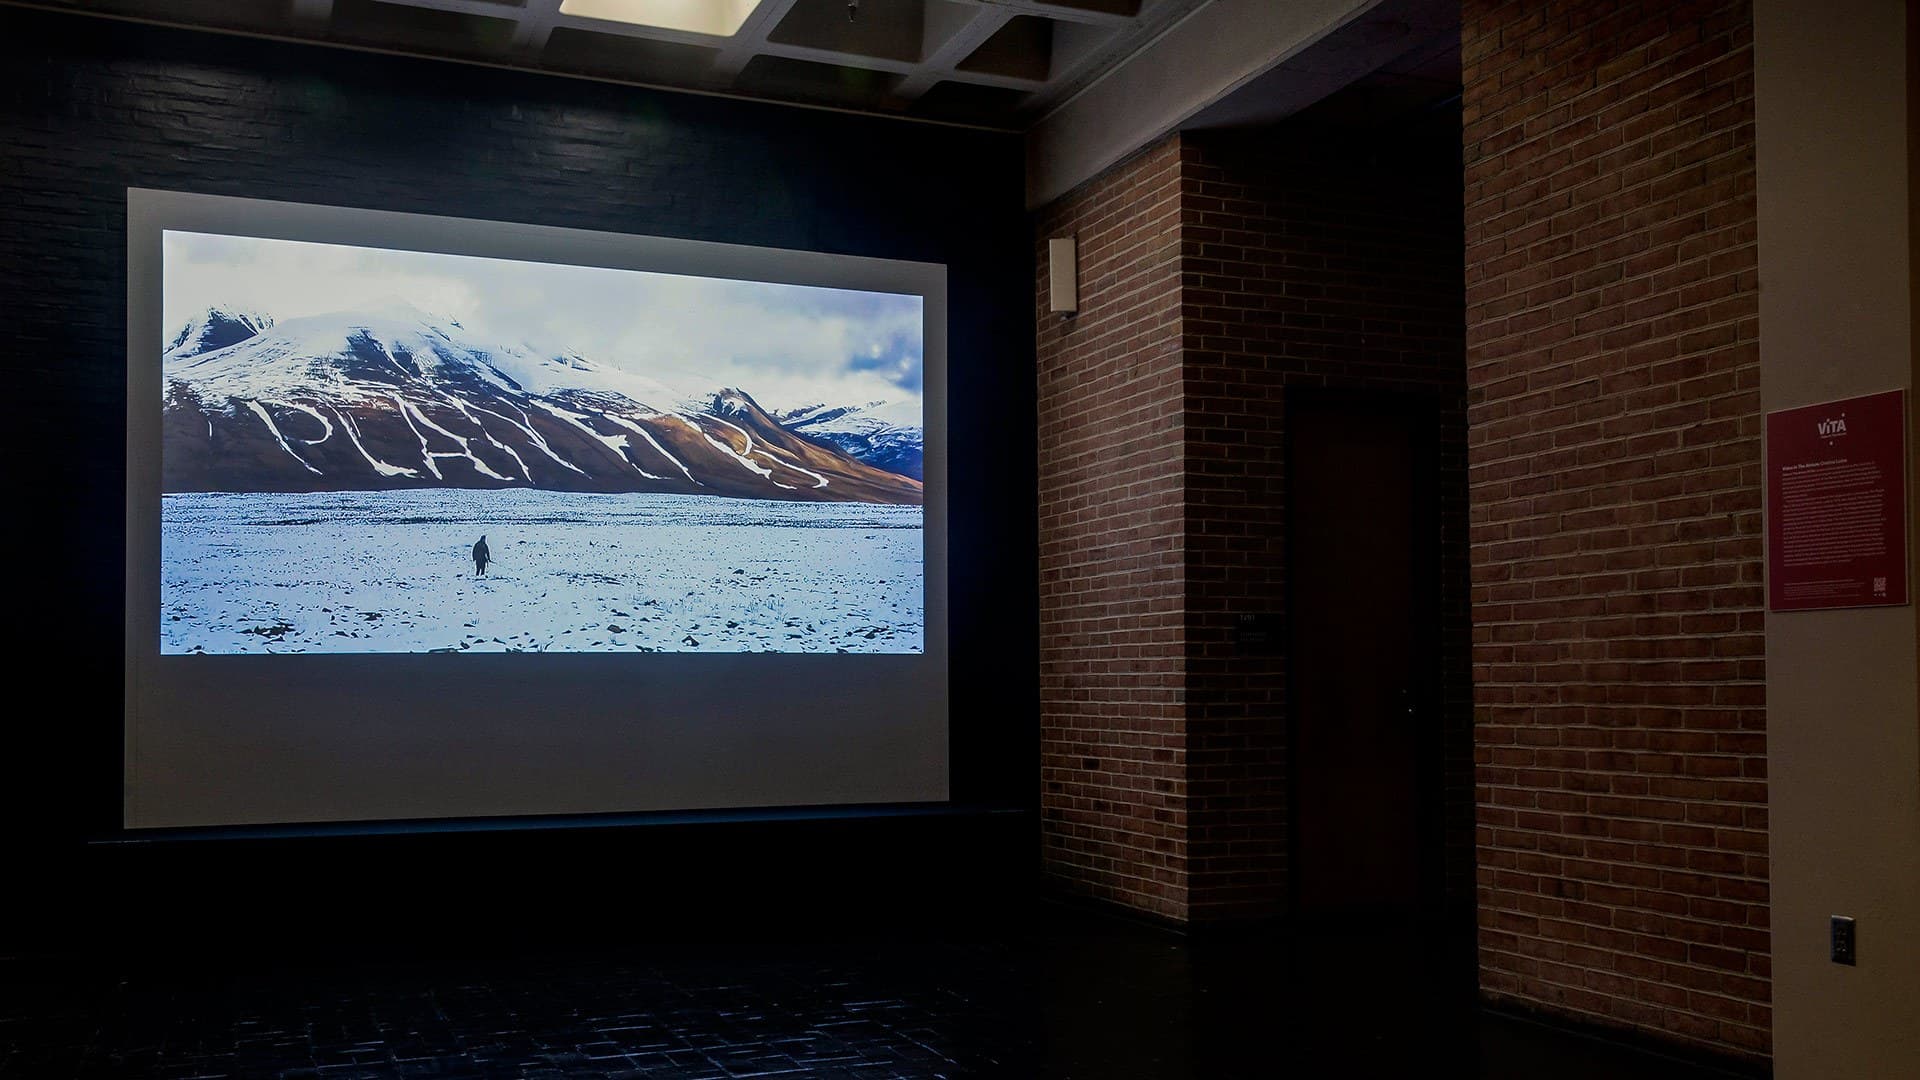 Video of snowy mountains projected on screen